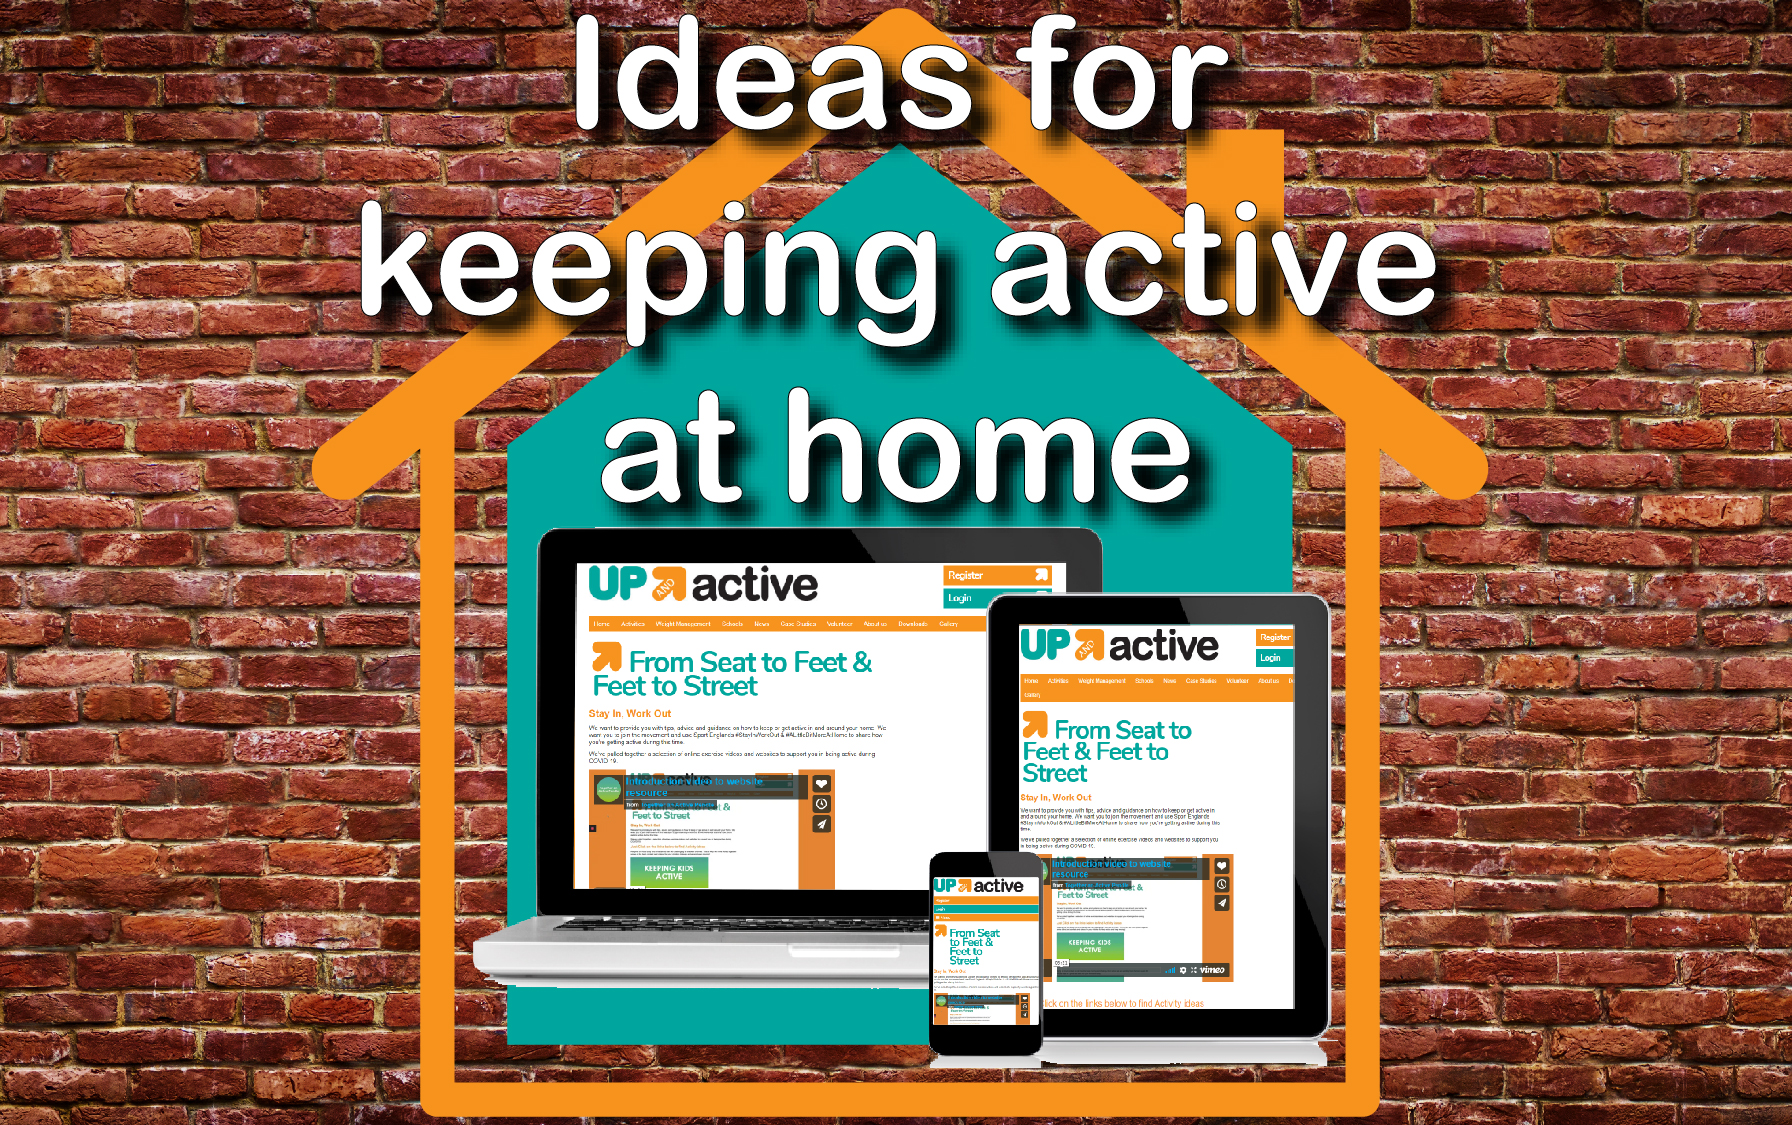 Stay 'Up and Active' at Home